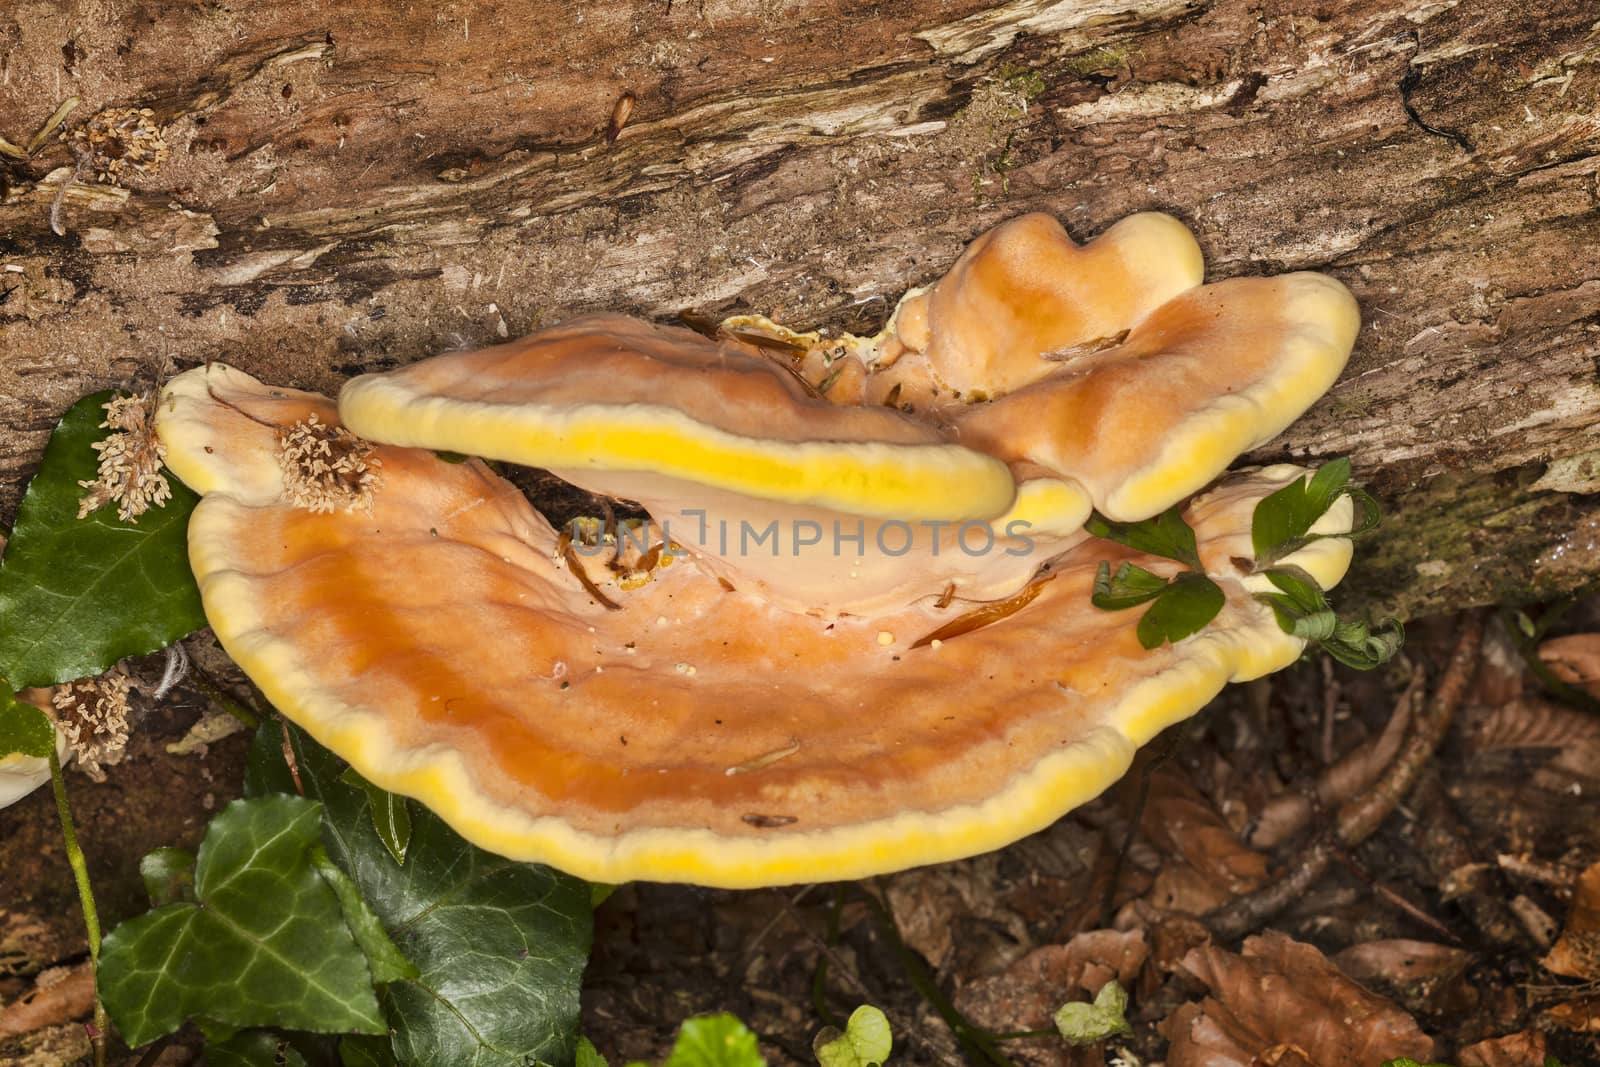 Bracket fungus growing from a decaying tree by ant